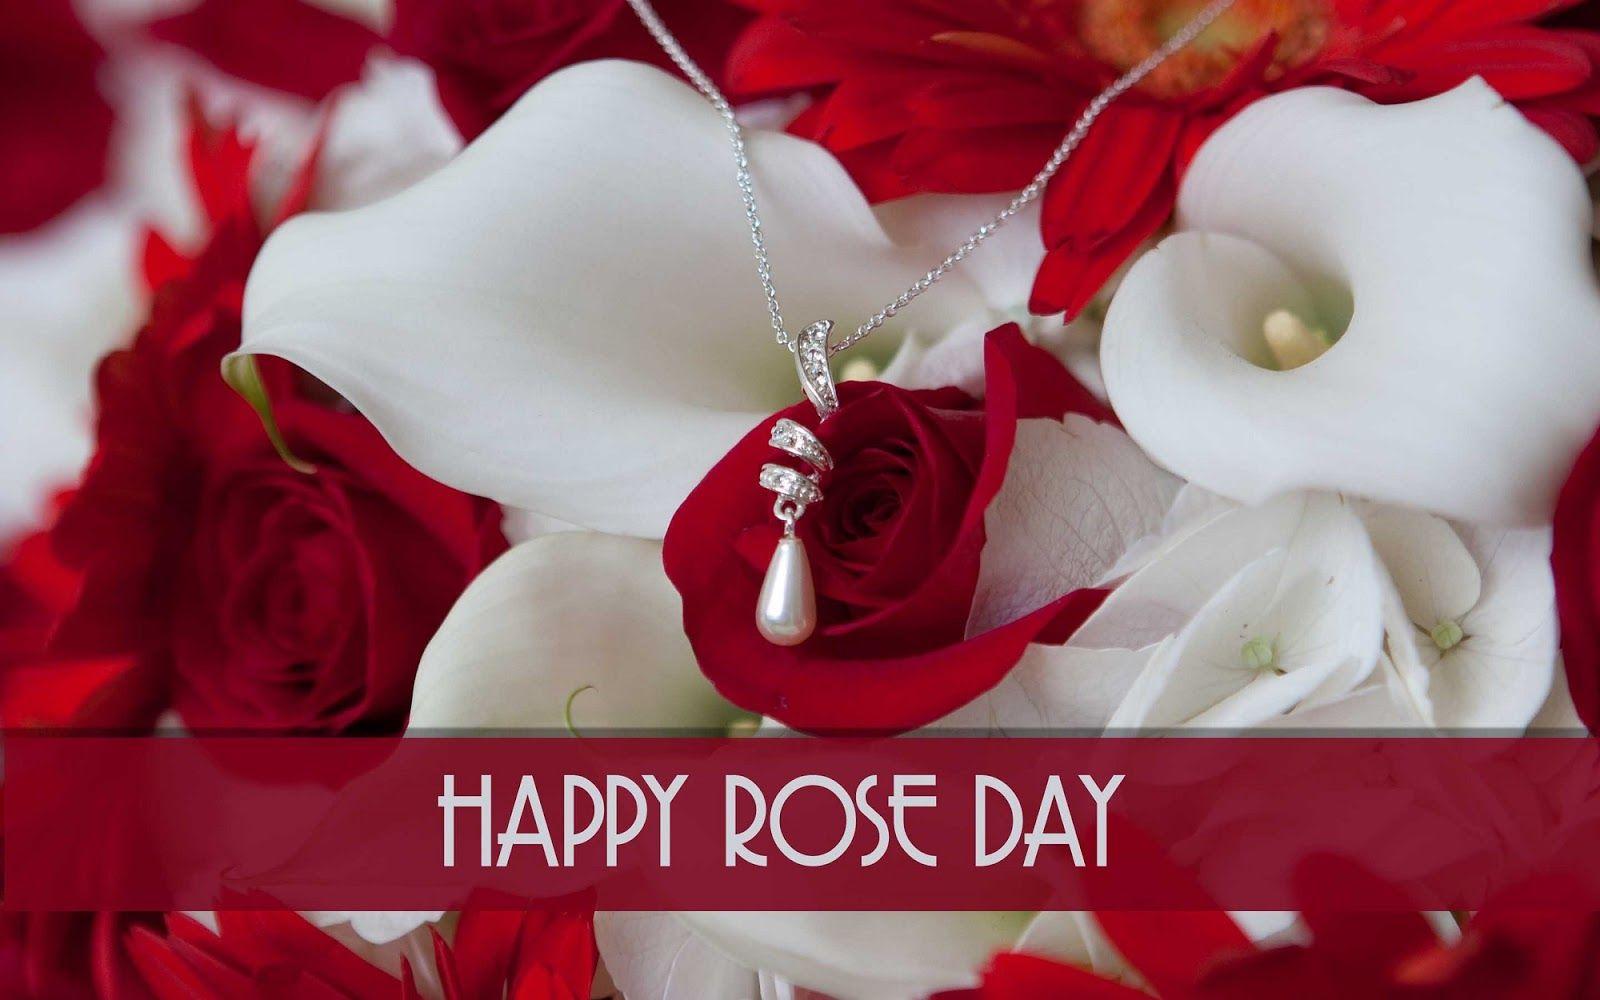 Happy Rose Day 2018 Quotes,Wishes,Messages,Whatsapp Status,SMS